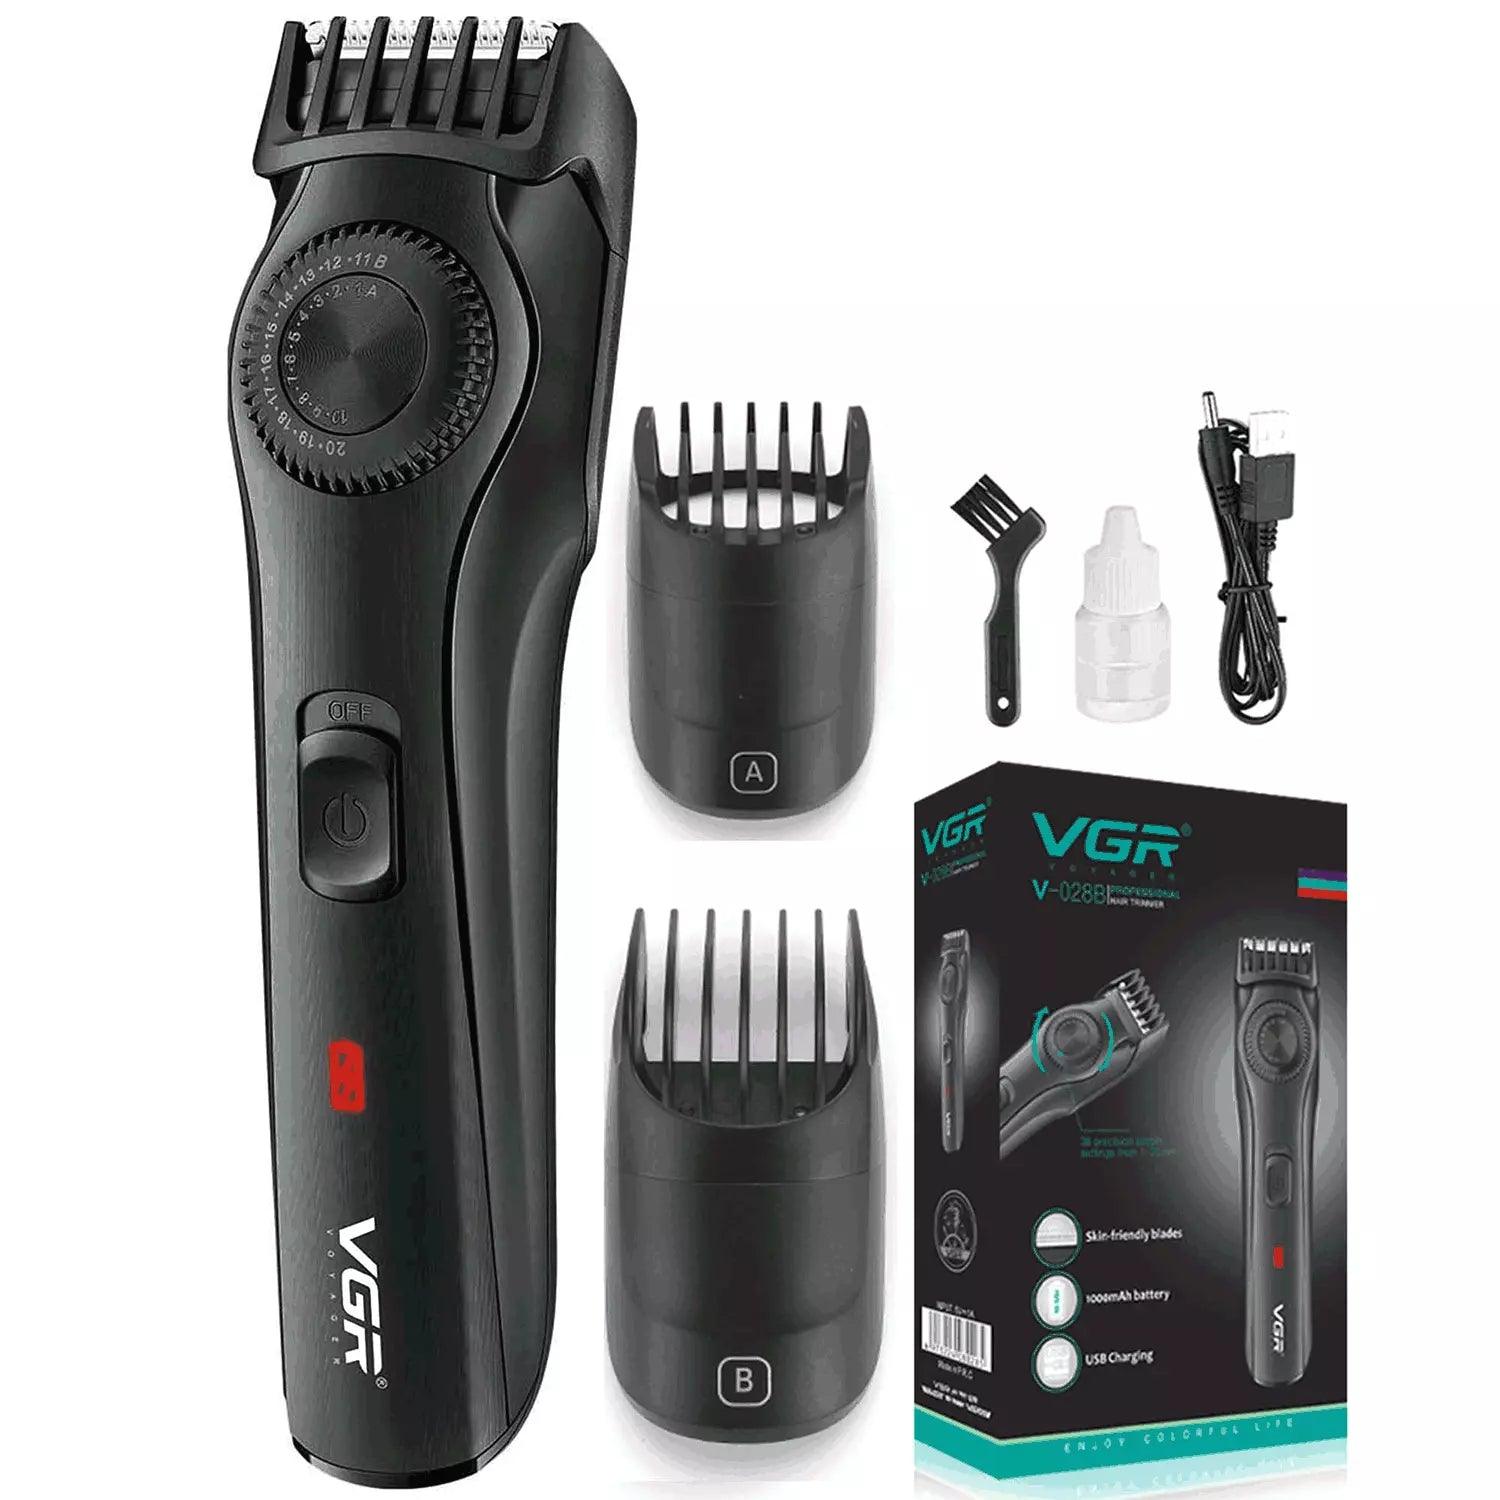 Professional Hair Clippers for Men,Barber Clippers Cordless Hair Trimmer Set with 5-Speed Ultra Quiet Rechargeable Hair Cutting Kit for Kids Home Trav